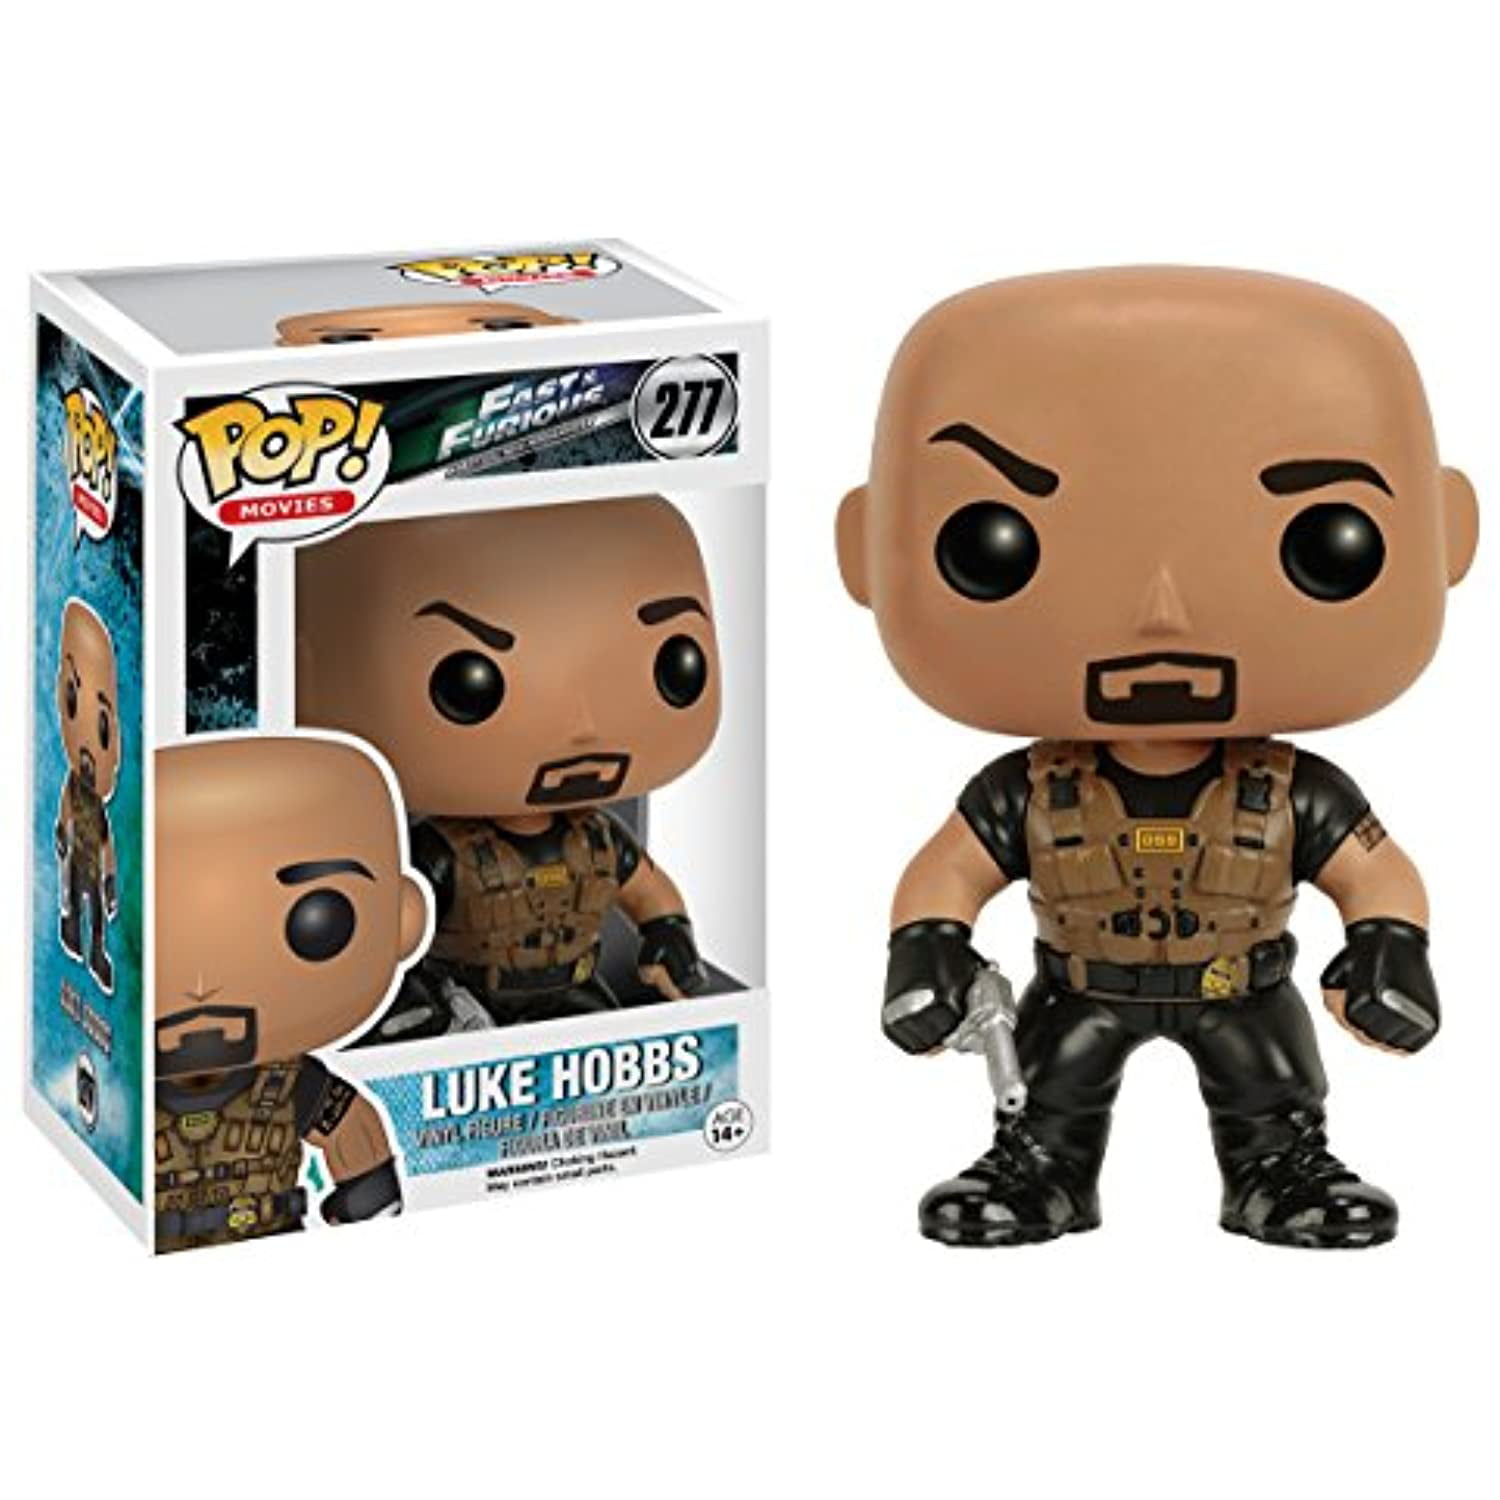 Funko - We're giving away a set of our Fast & Furious Pop! figures